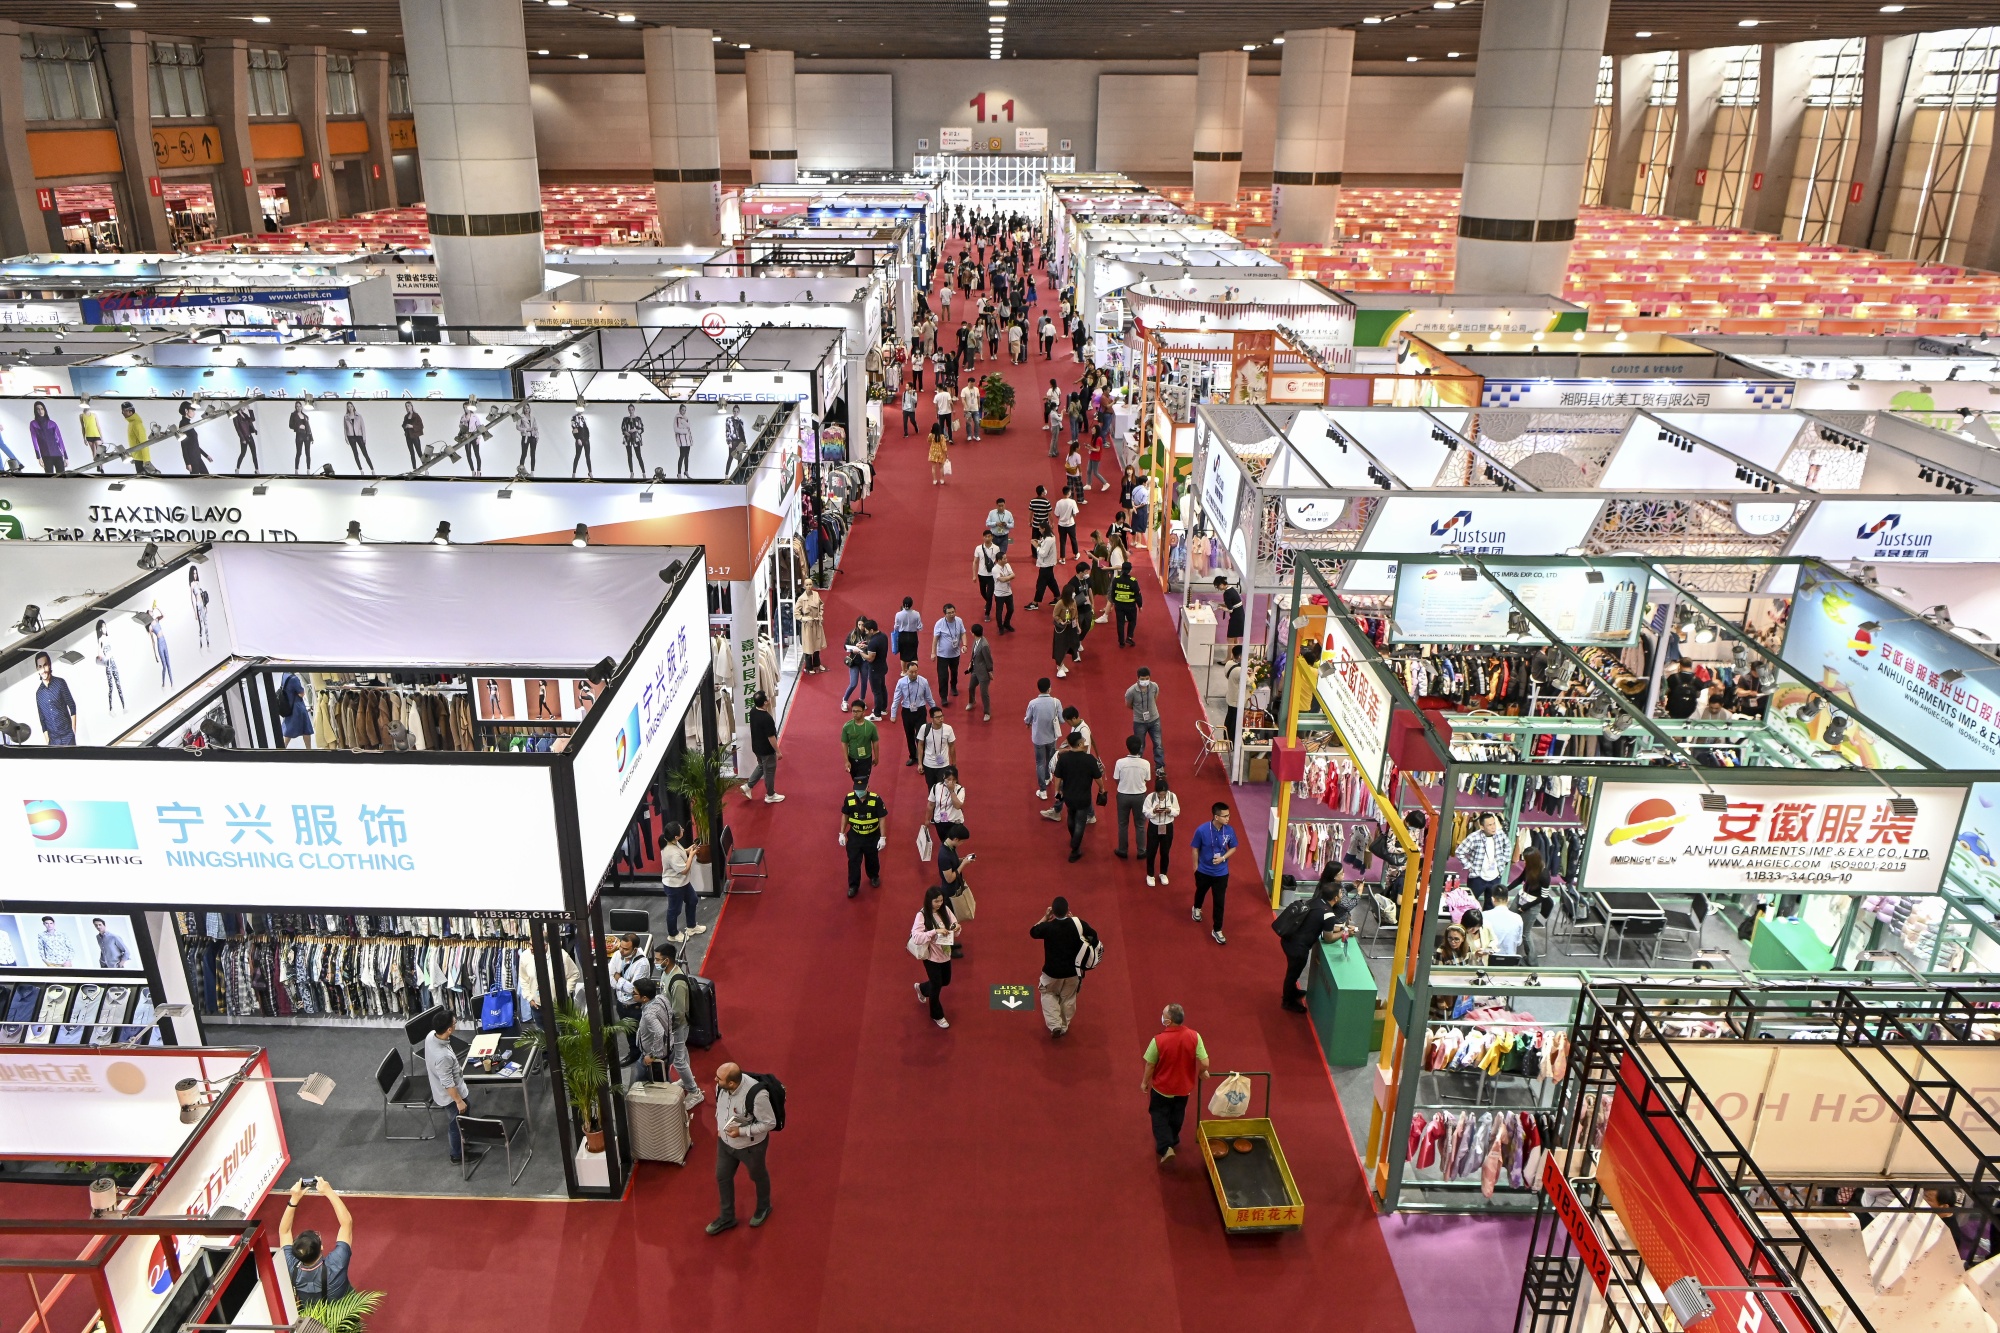 China’s Main Trade Fair Struggles to Lure Buyers as Global Growth Slows